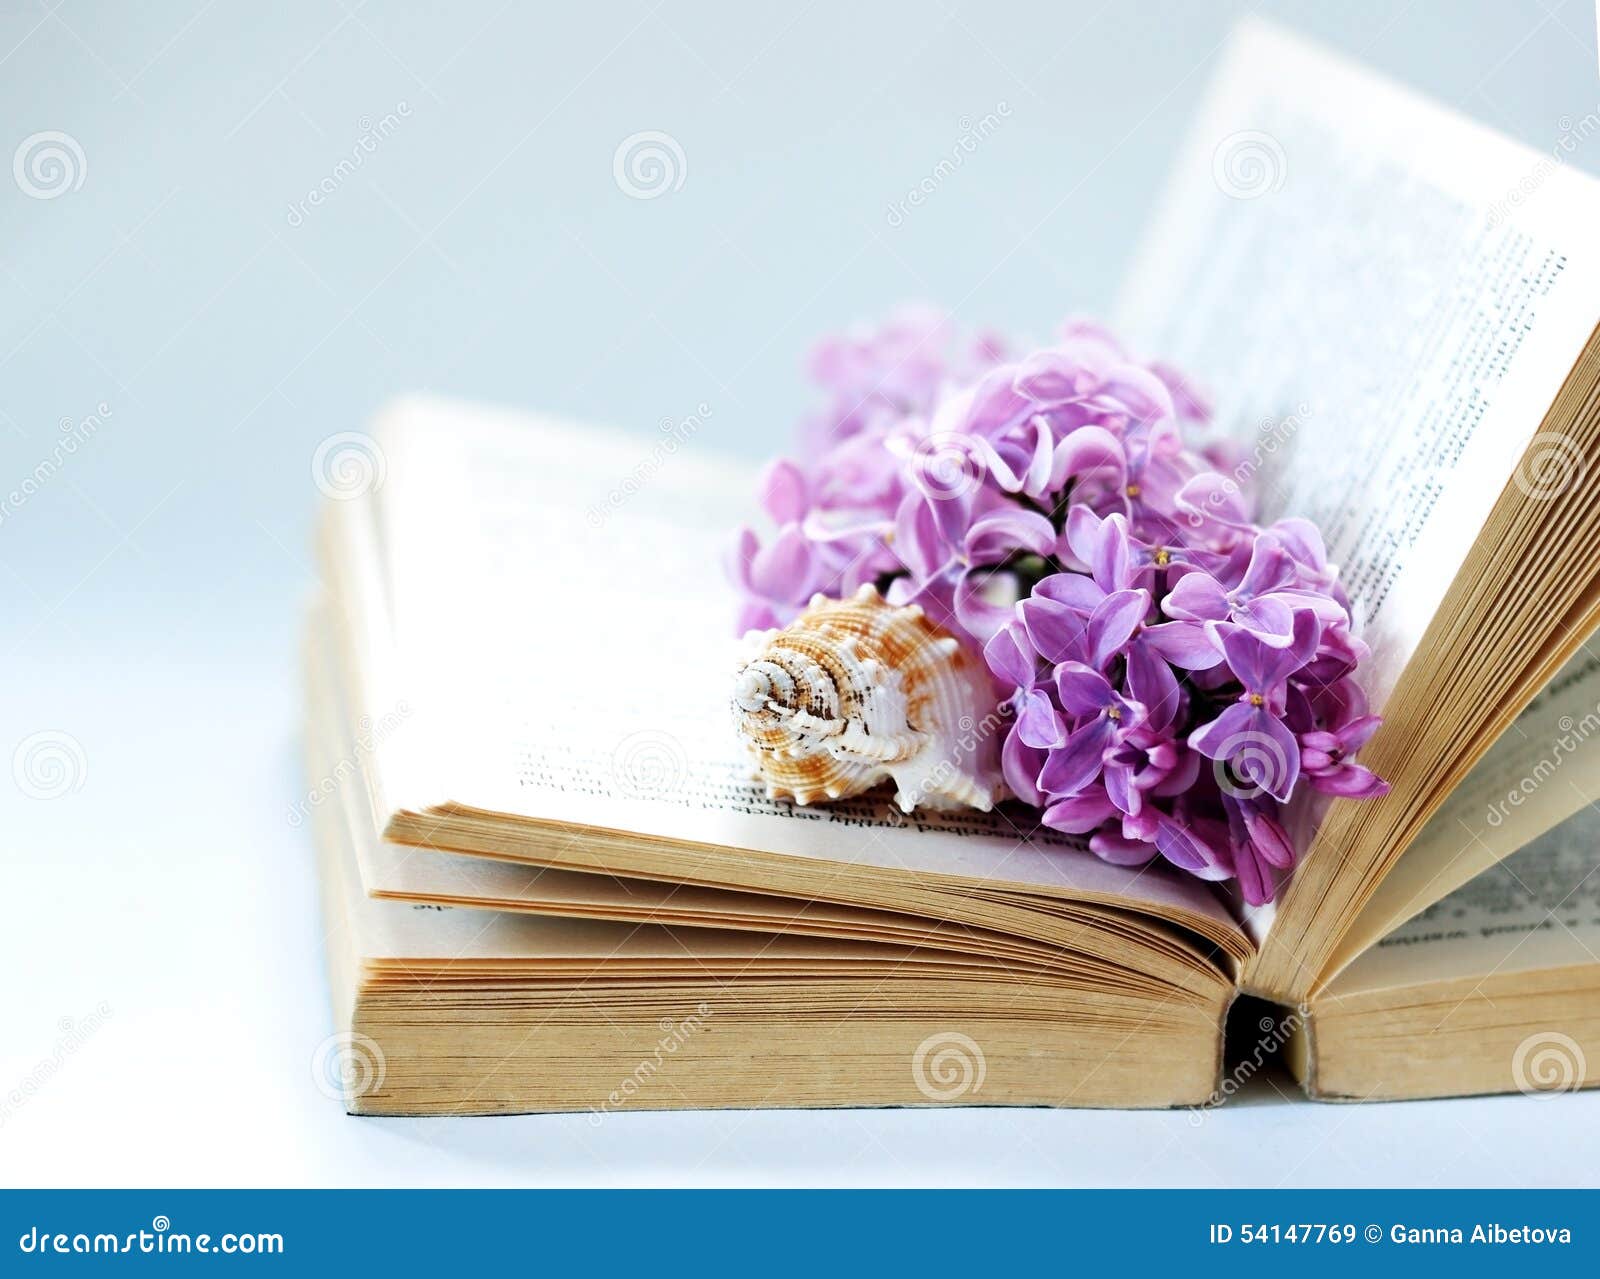 Vintage Romantic Background with Old Book, Lilac Flower, and Little ...